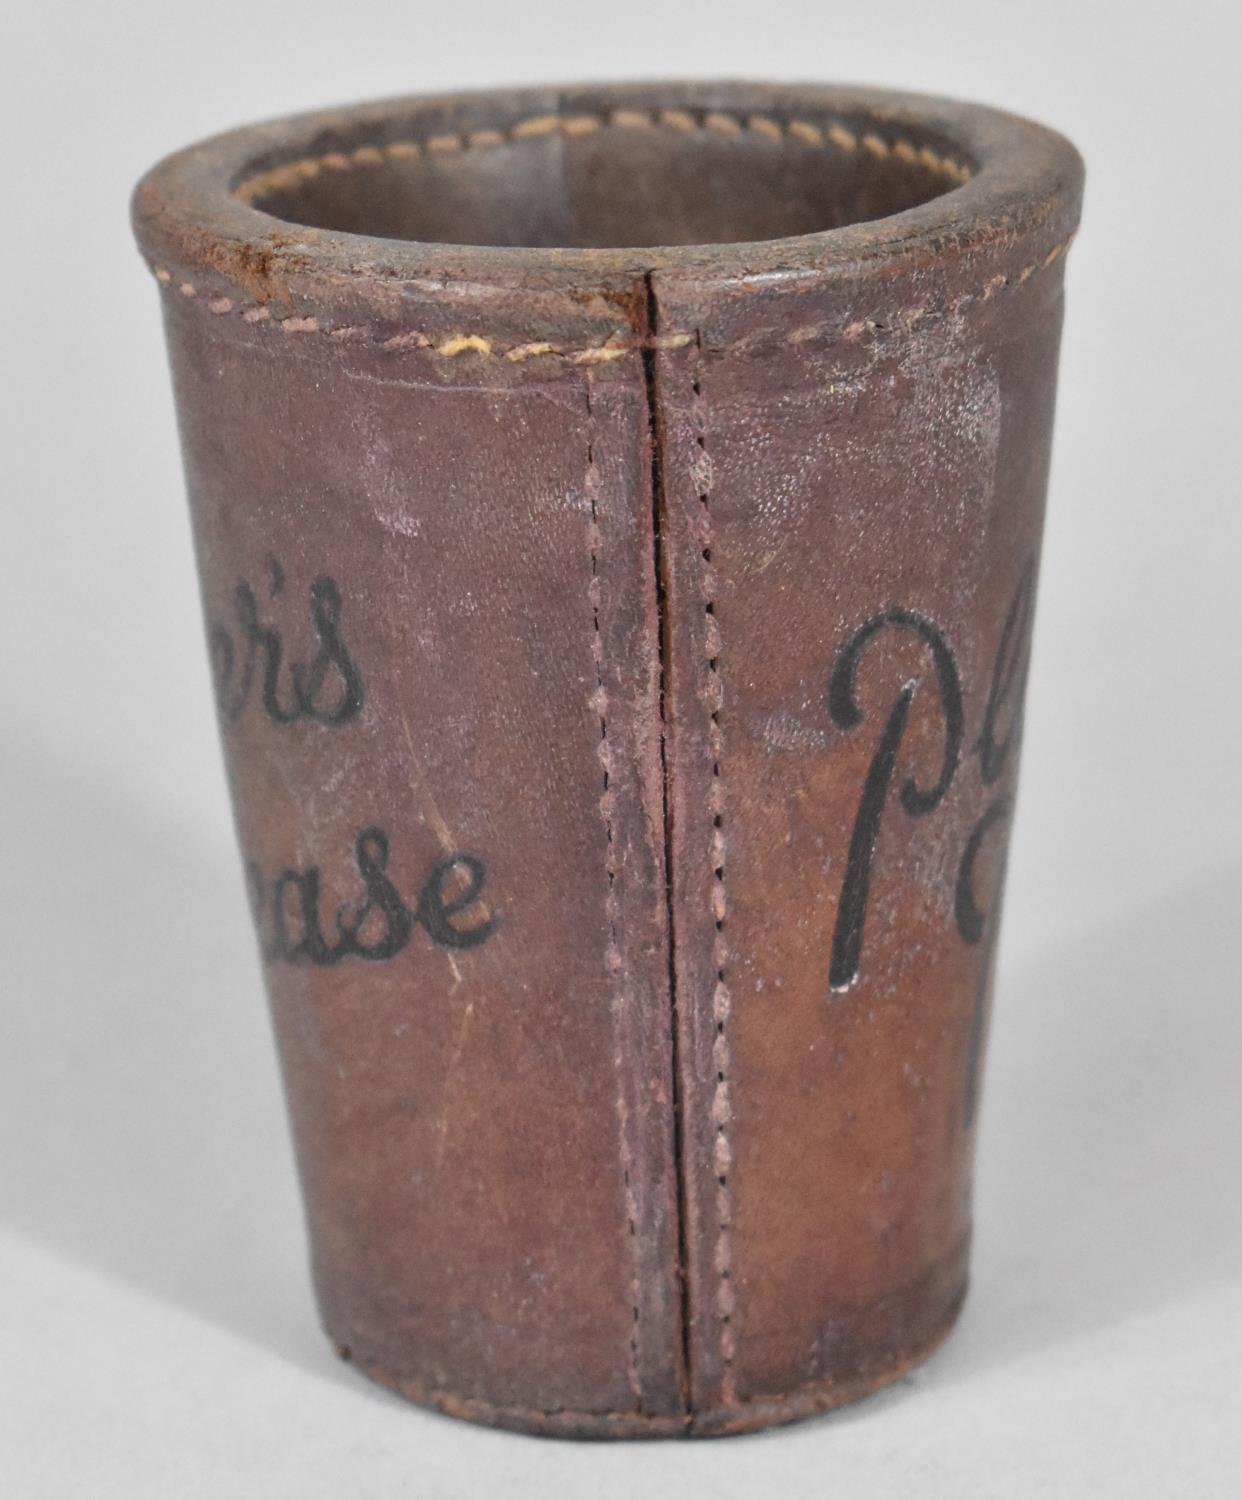 A Vintage Advertising Leather Cup, "Players Please", 10cm high - Image 2 of 2